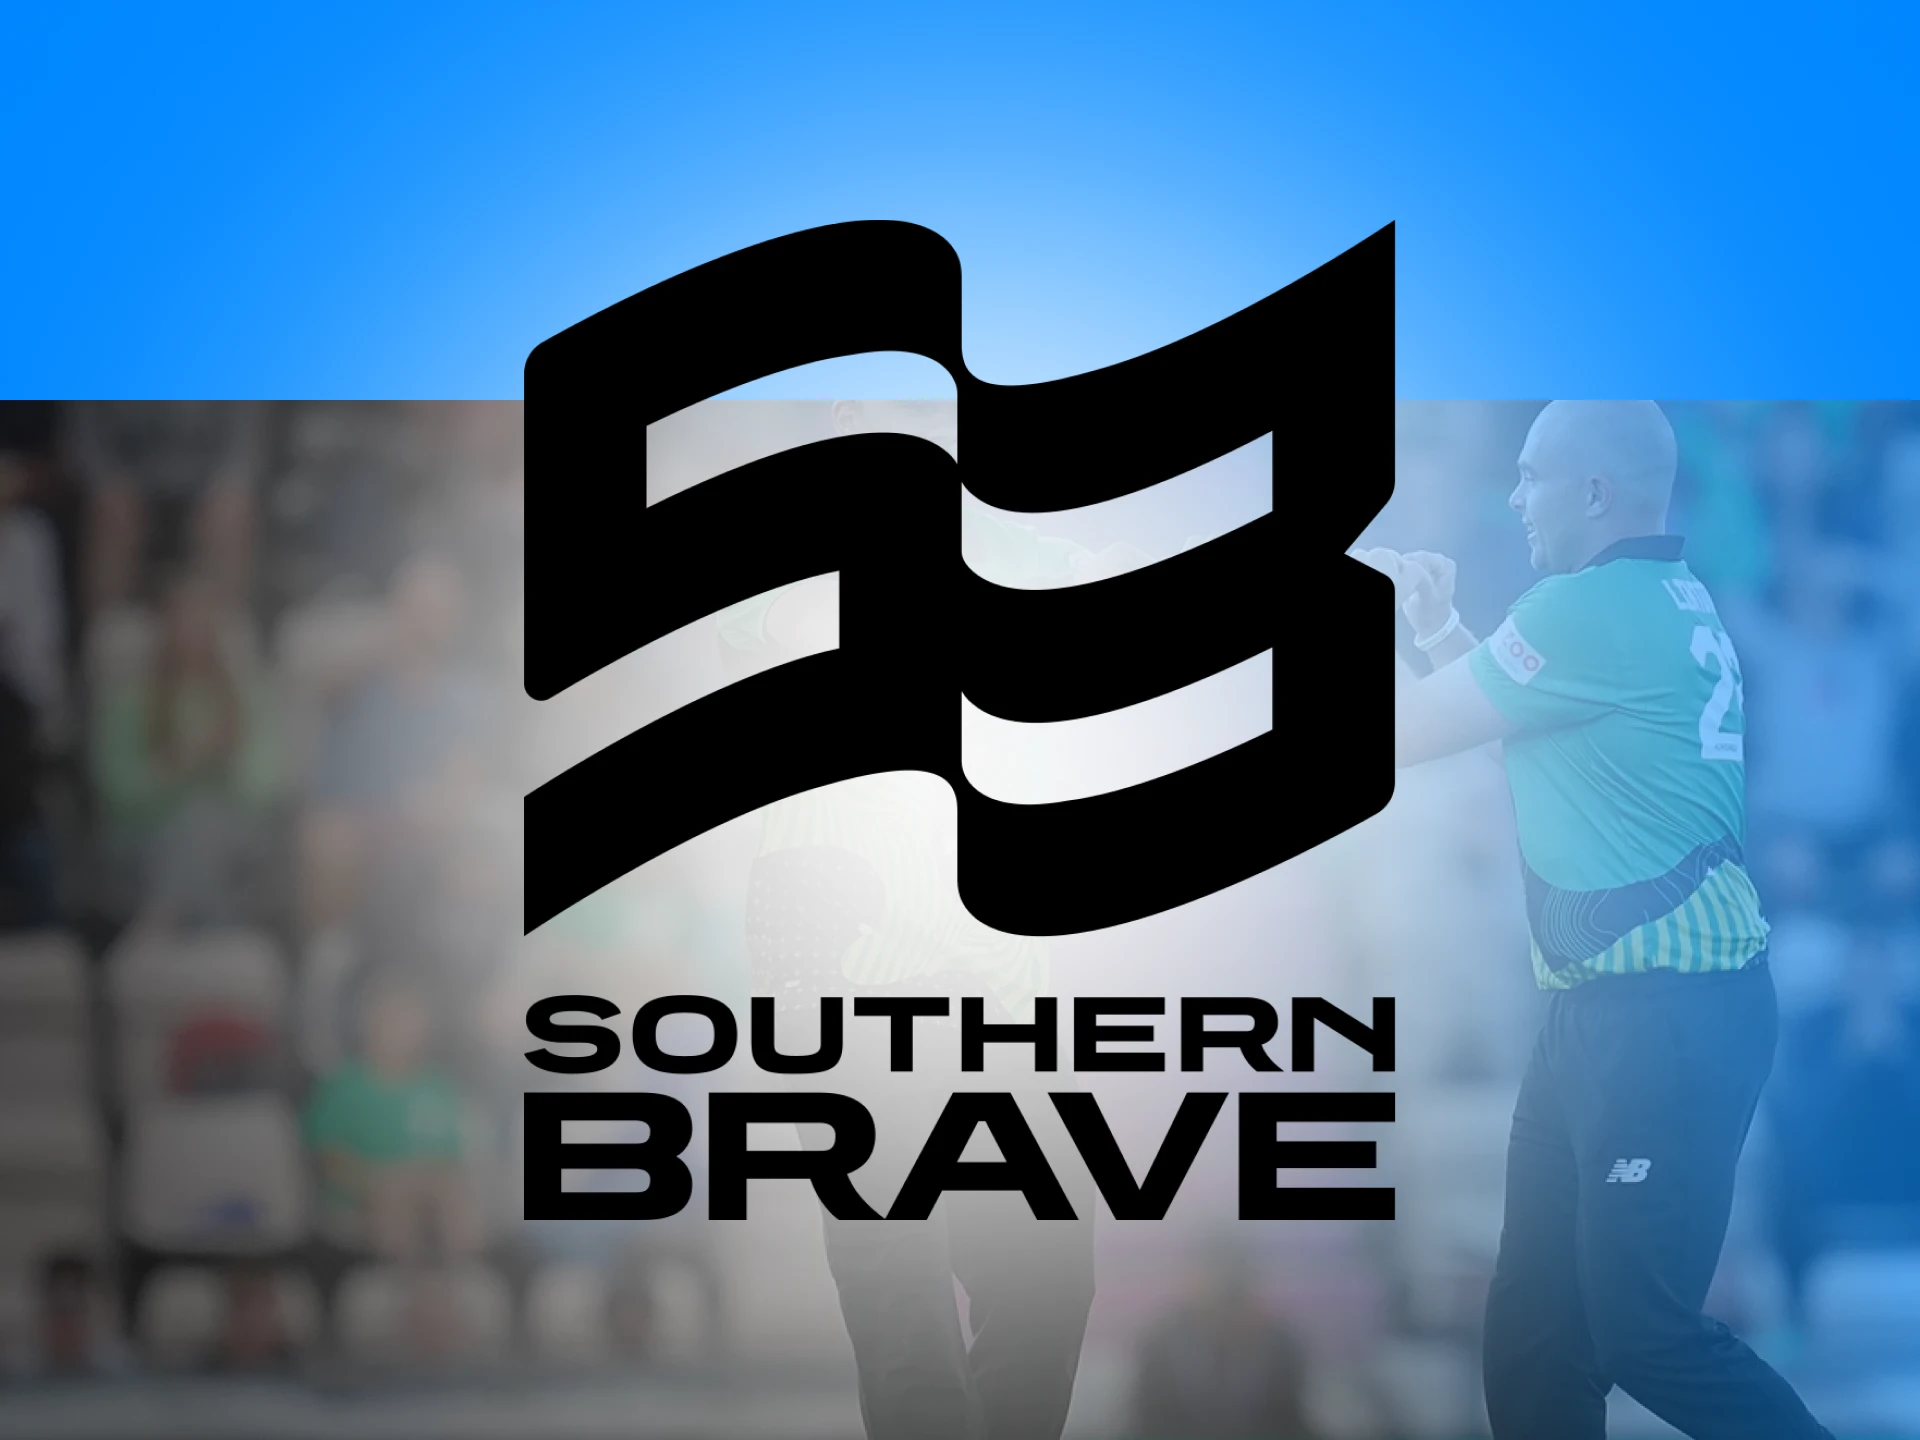 Double your money by betting on Southern Brave team.